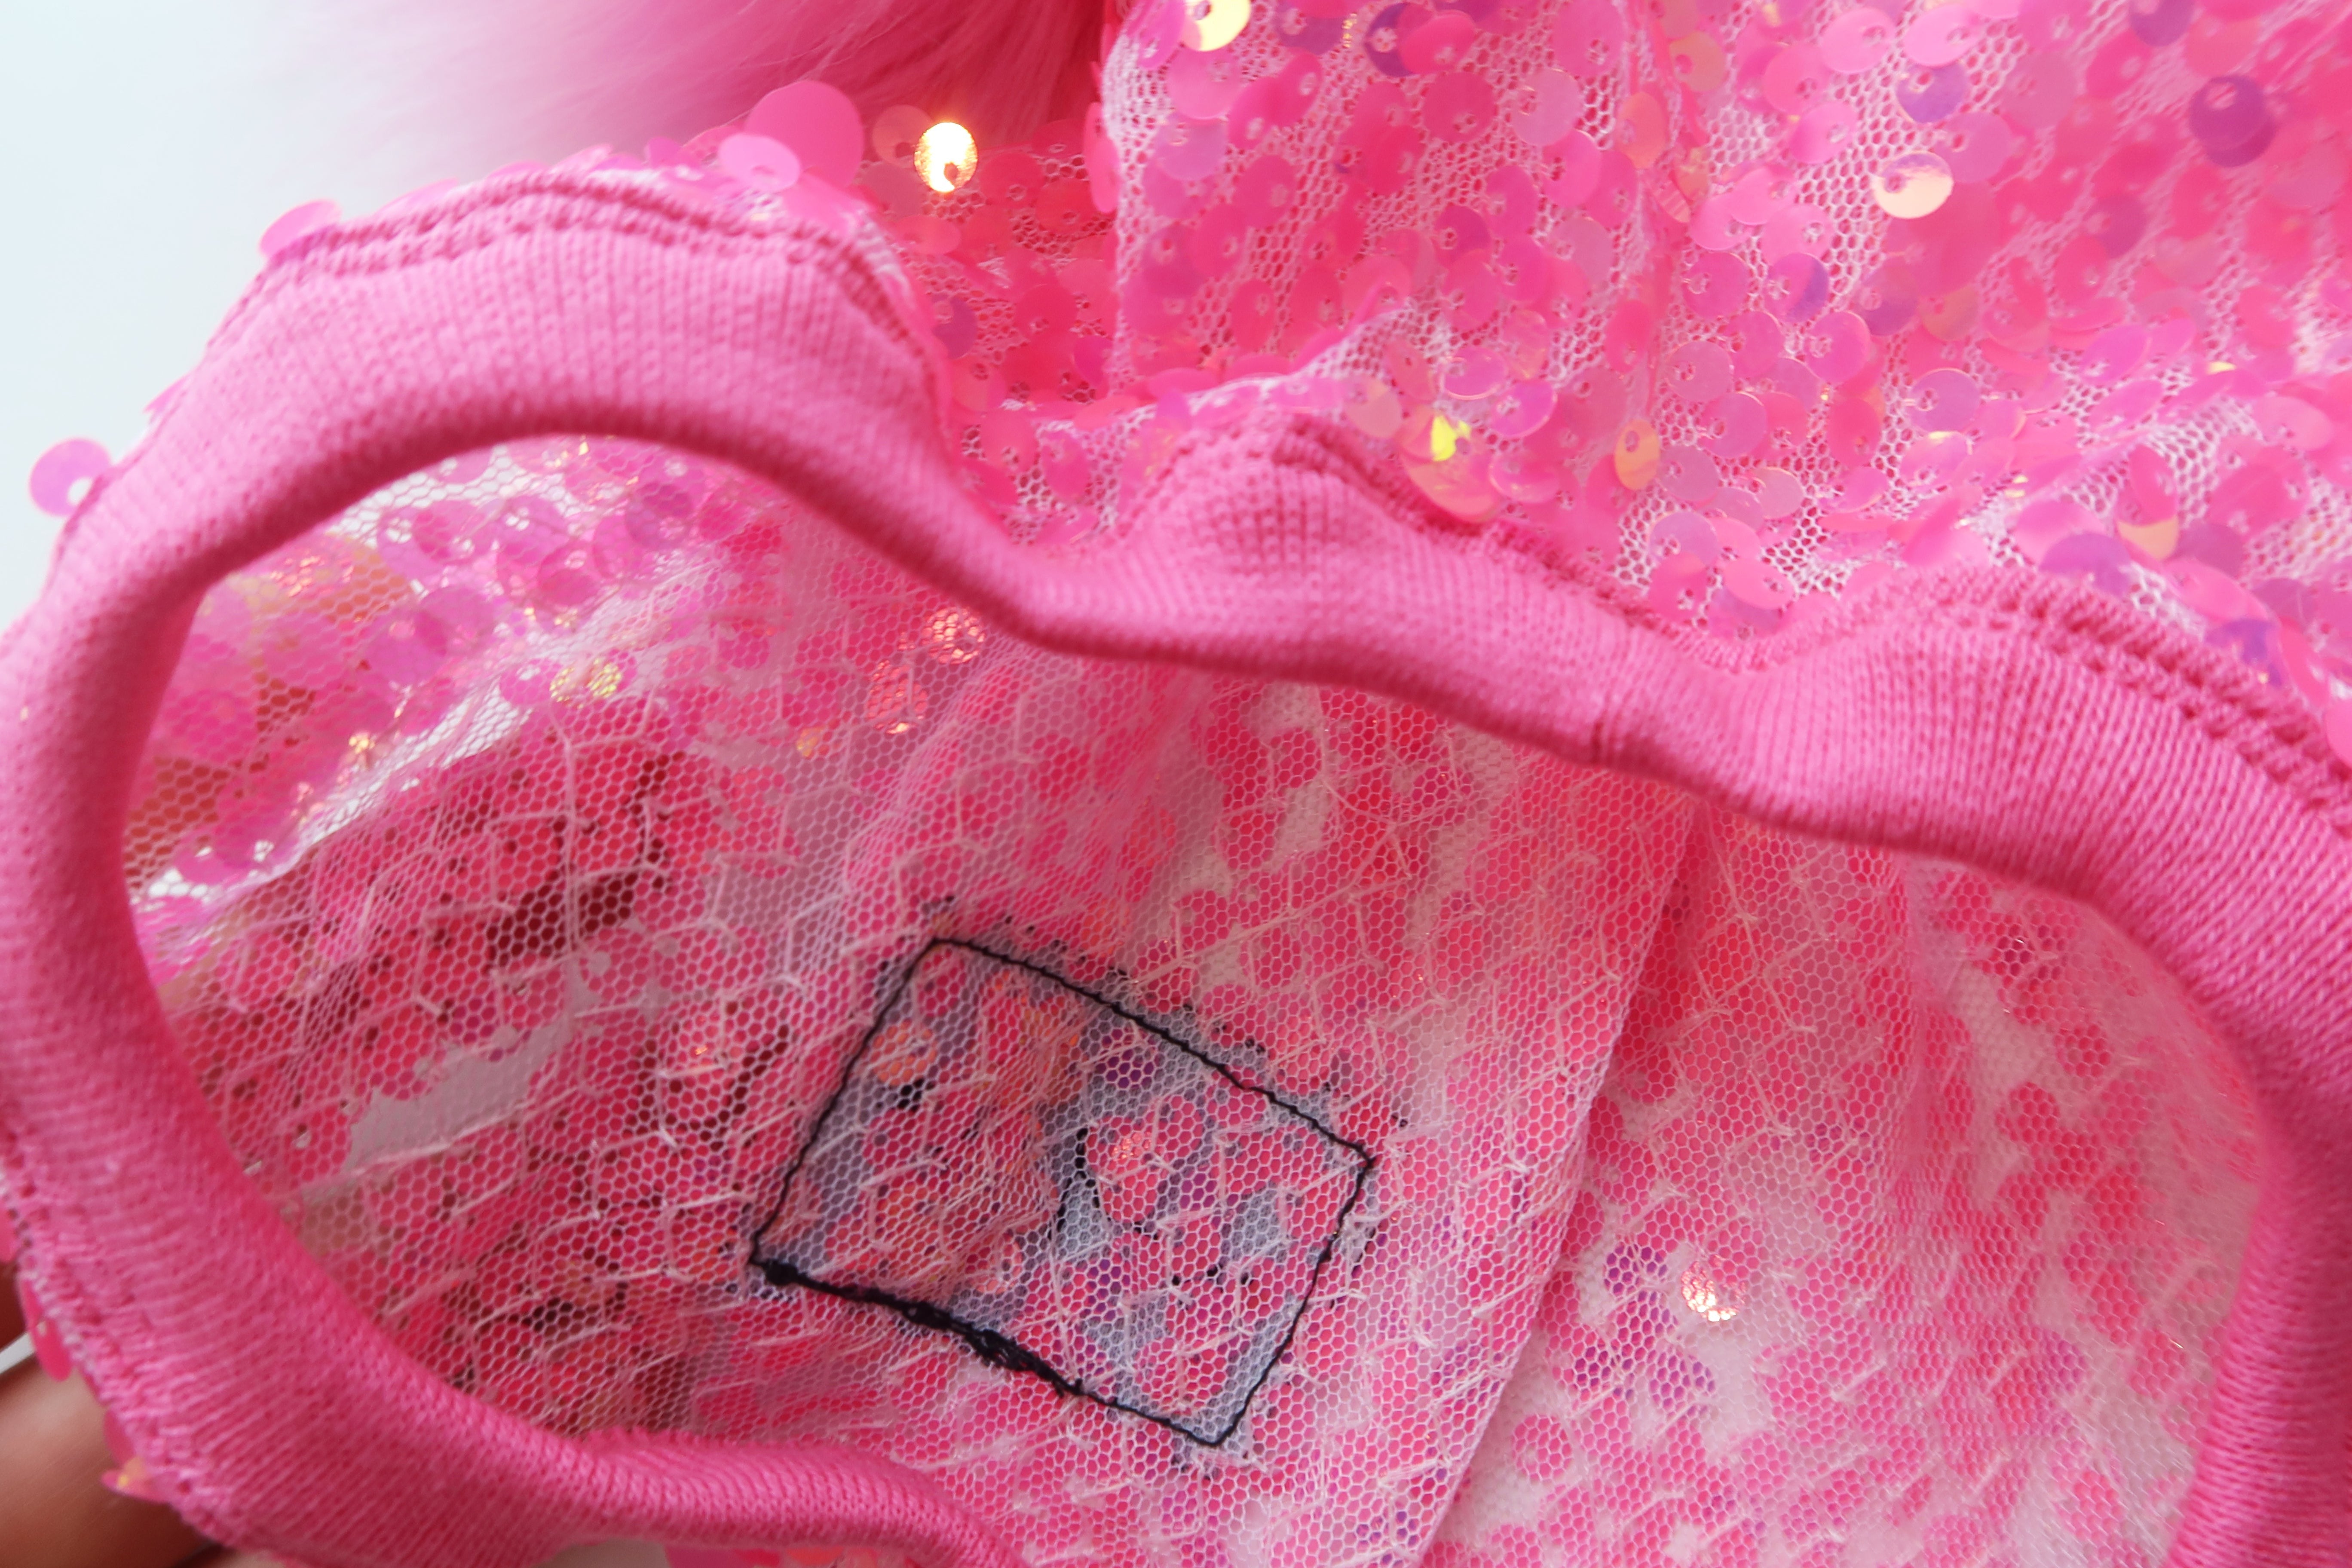 Limited Edition- Party Pink sequin Faux fur dog top - Only XS left - Not restocking.